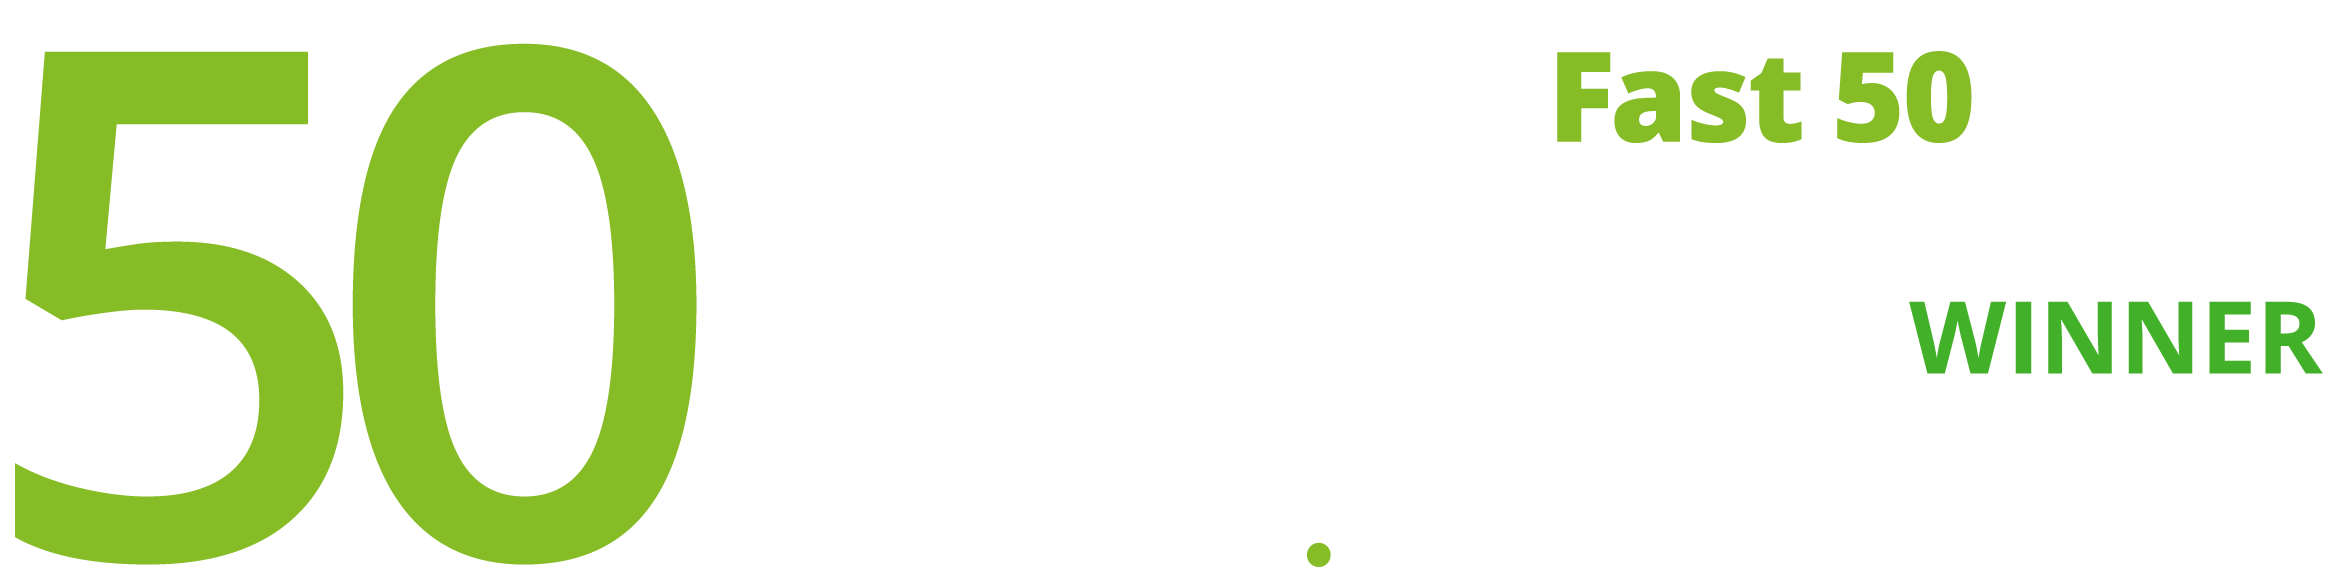 clean technology